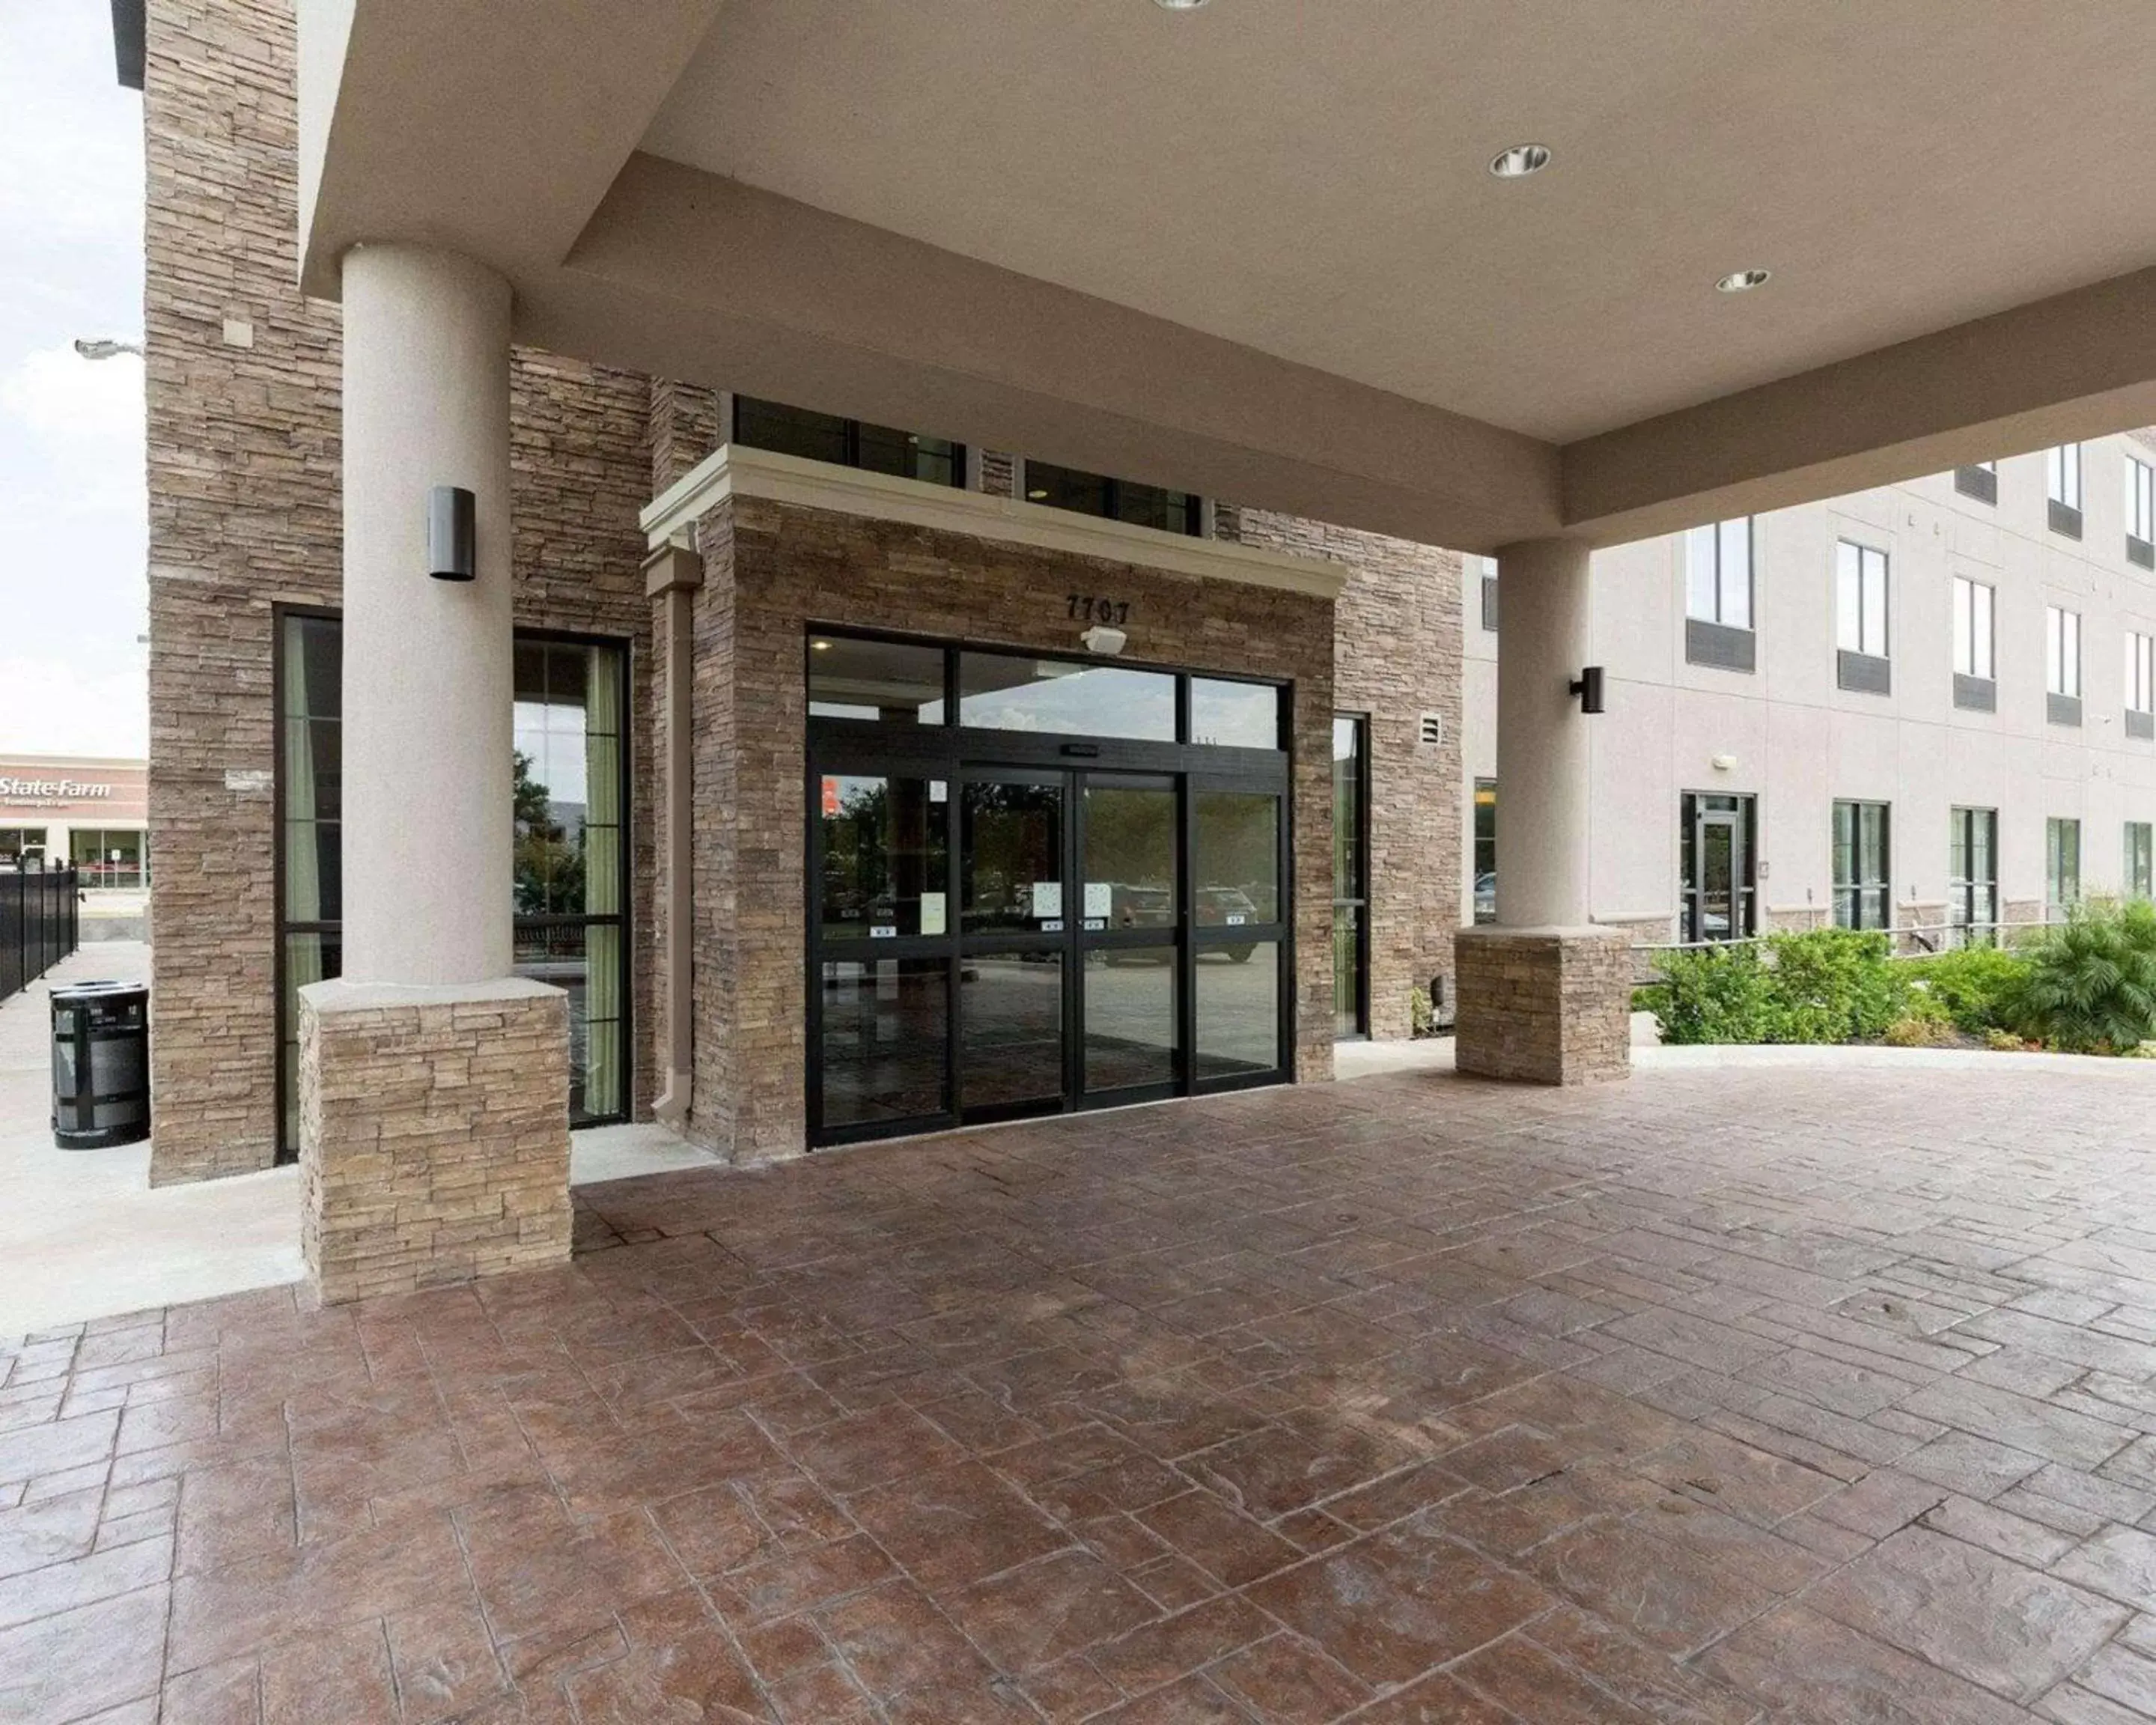 Property building in Comfort Suites near Westchase on Beltway 8